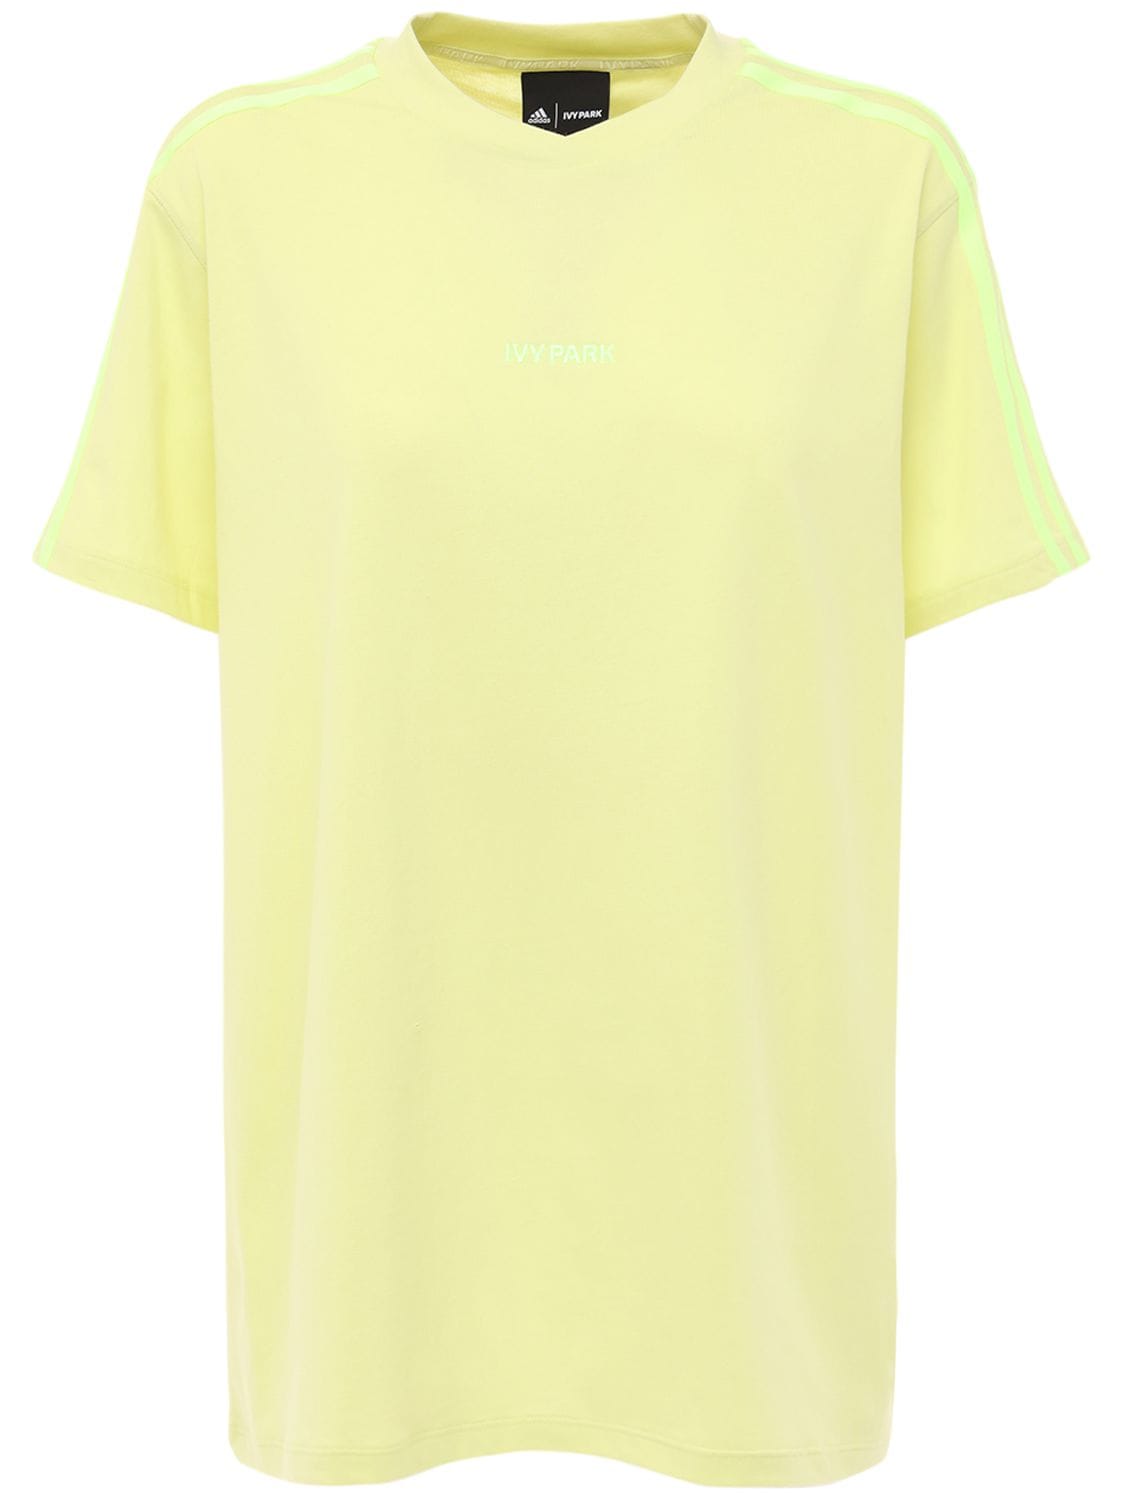 Adidas X Ivy Park Ivy Park Cotton 4all 3s T-shirt In Yellow Tint | ModeSens